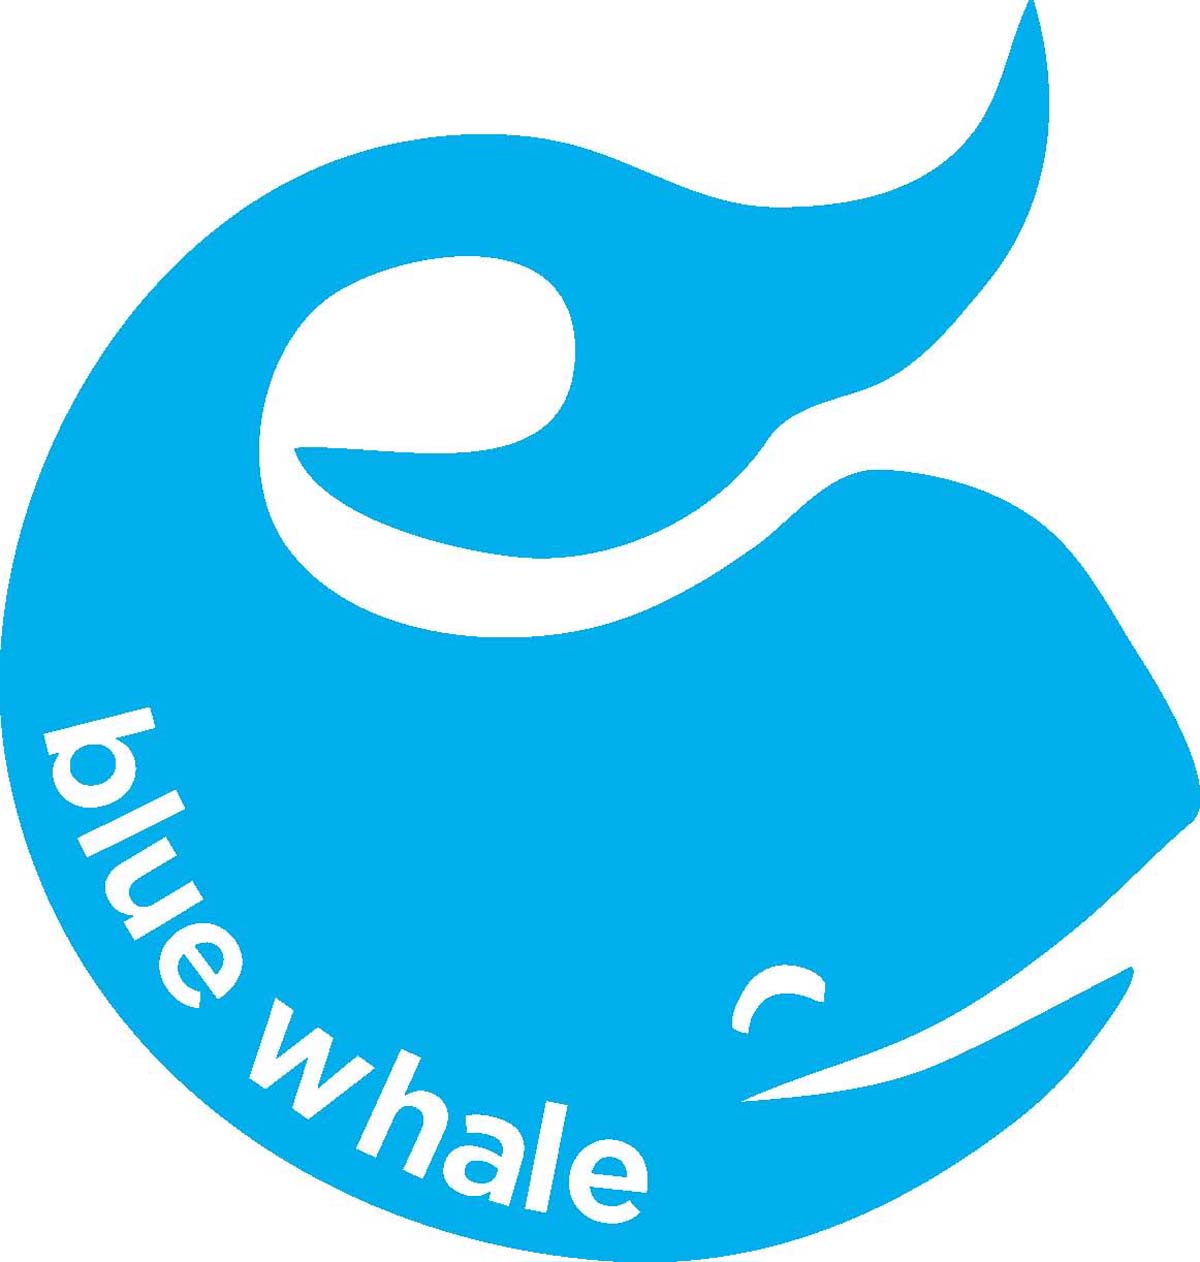 The Blue Whale | The Fire Island Pines Historical Preservation Society